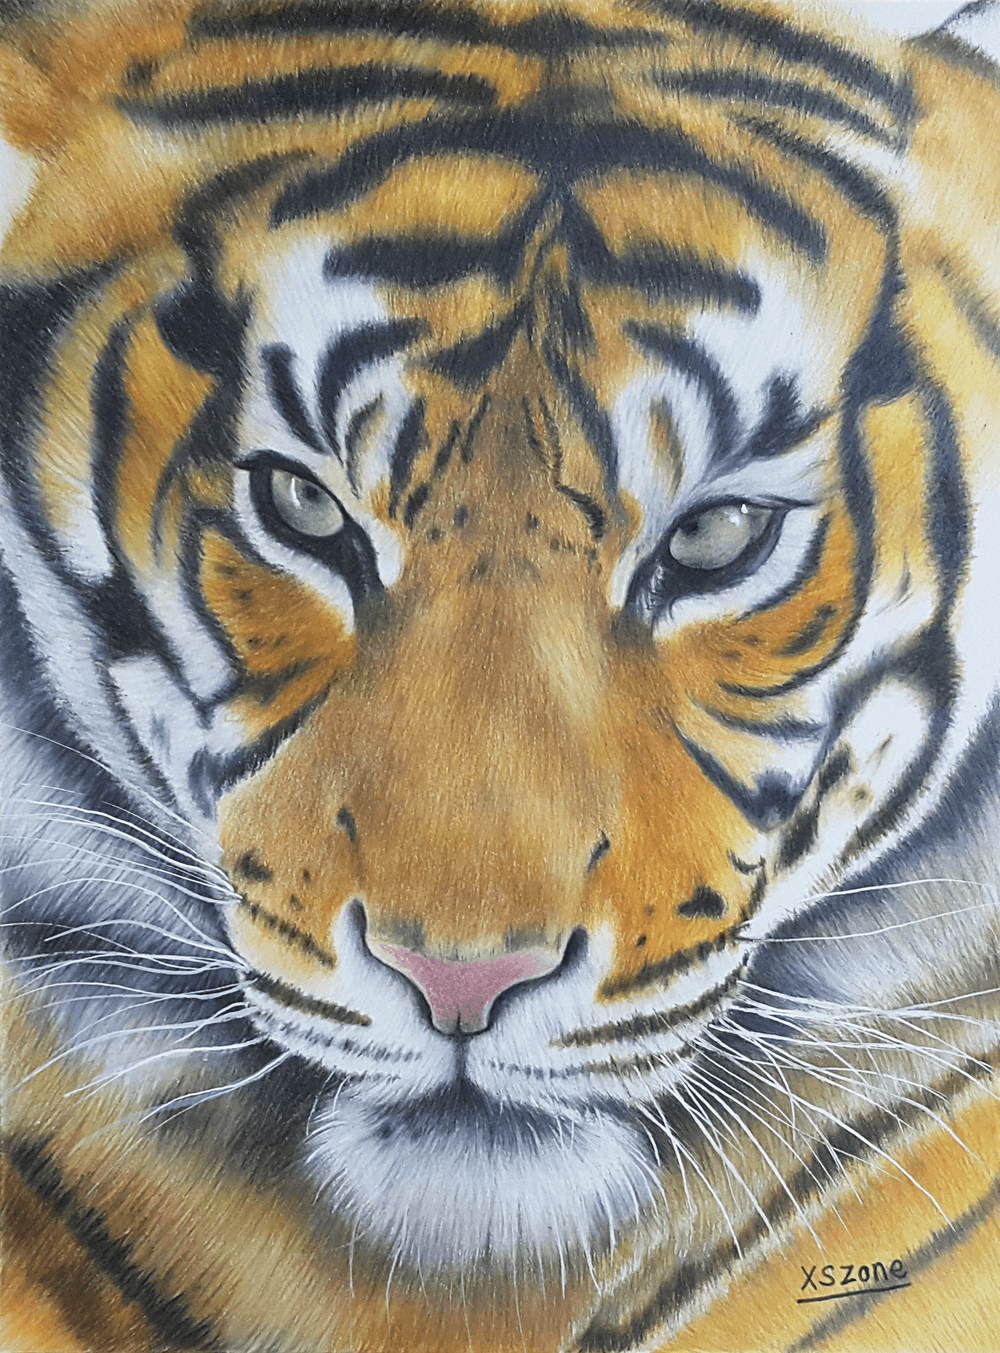 2022 Chinese New Year - Tiger Year Colour Pencil Drawing | Xszone 新手区域 -  Xszone Drawing Collections | OpenSea